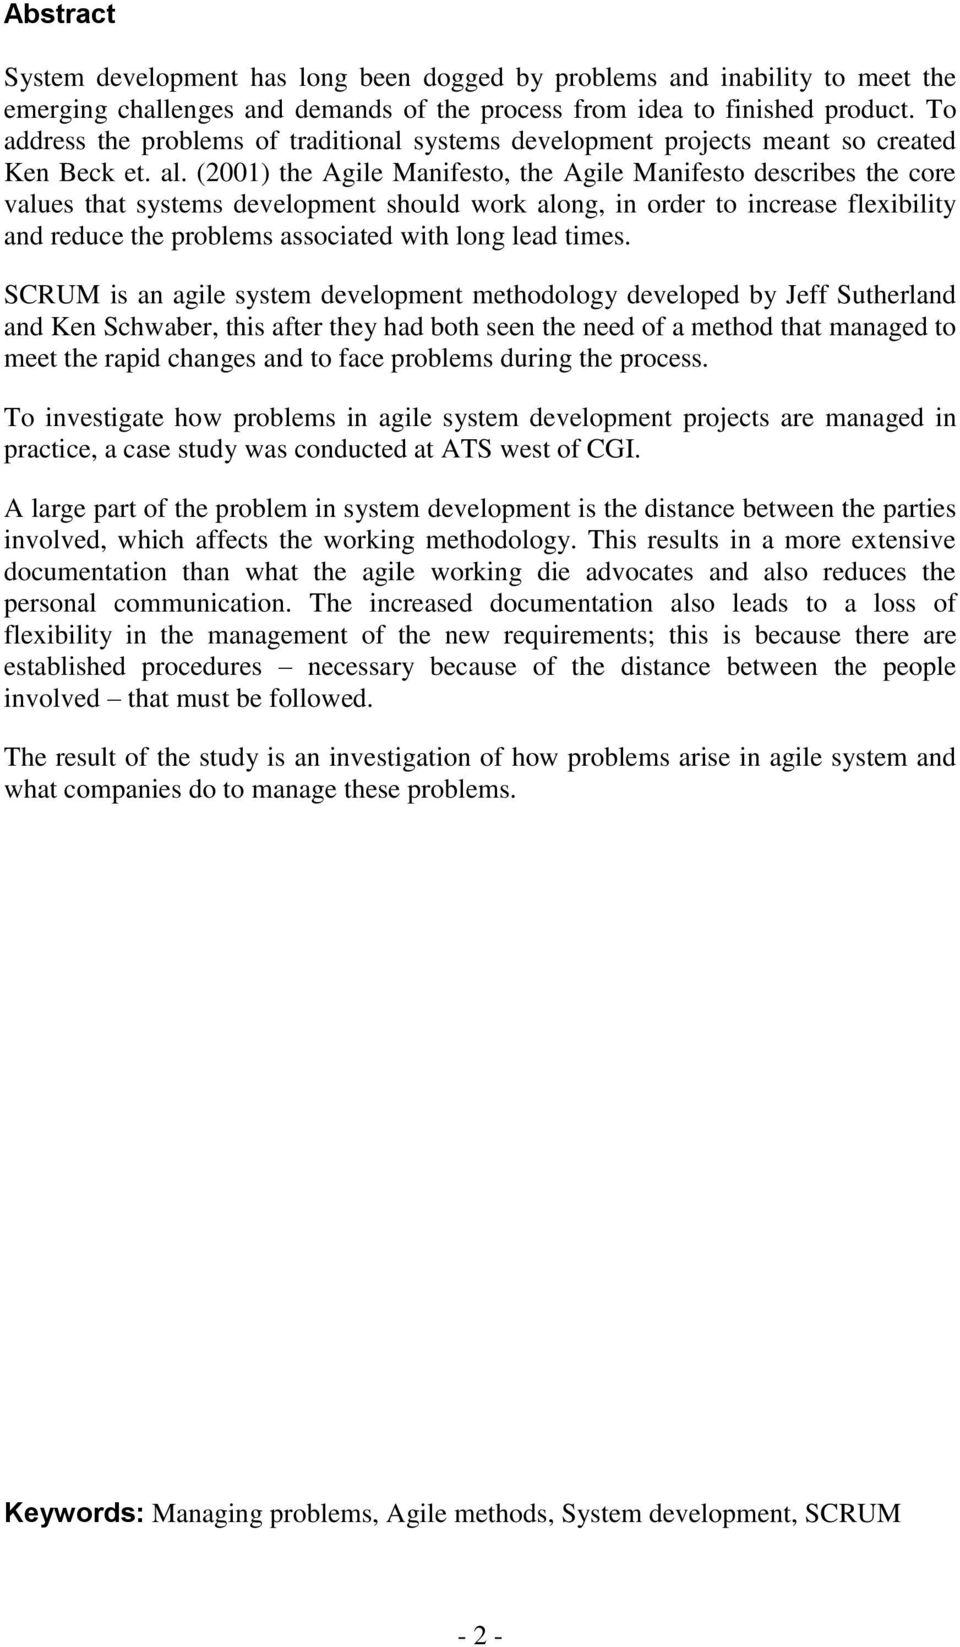 (2001) the Agile Manifesto, the Agile Manifesto describes the core values that systems development should work along, in order to increase flexibility and reduce the problems associated with long